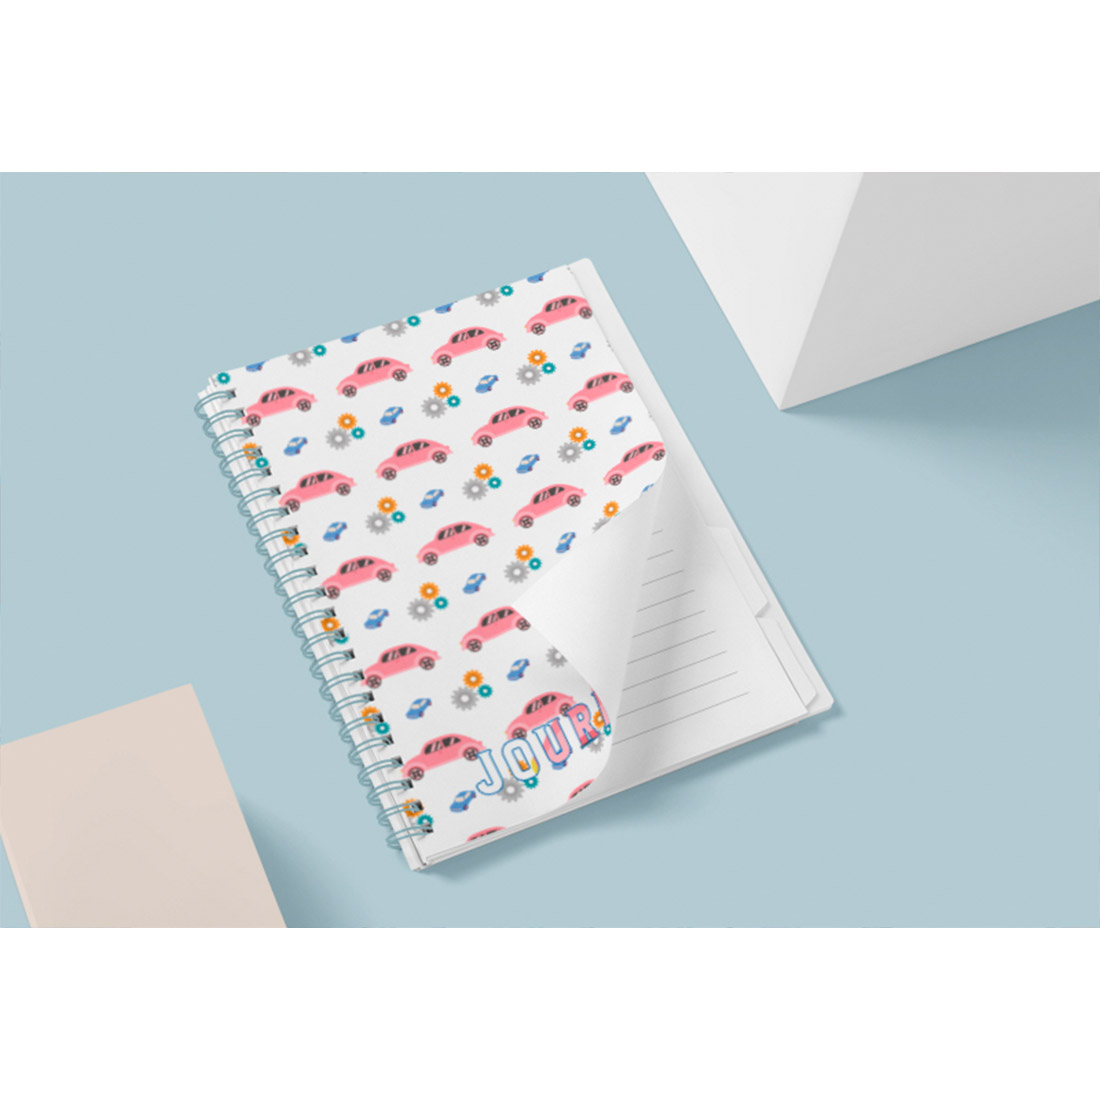 Delicate light notebook with cute cars on a cover.